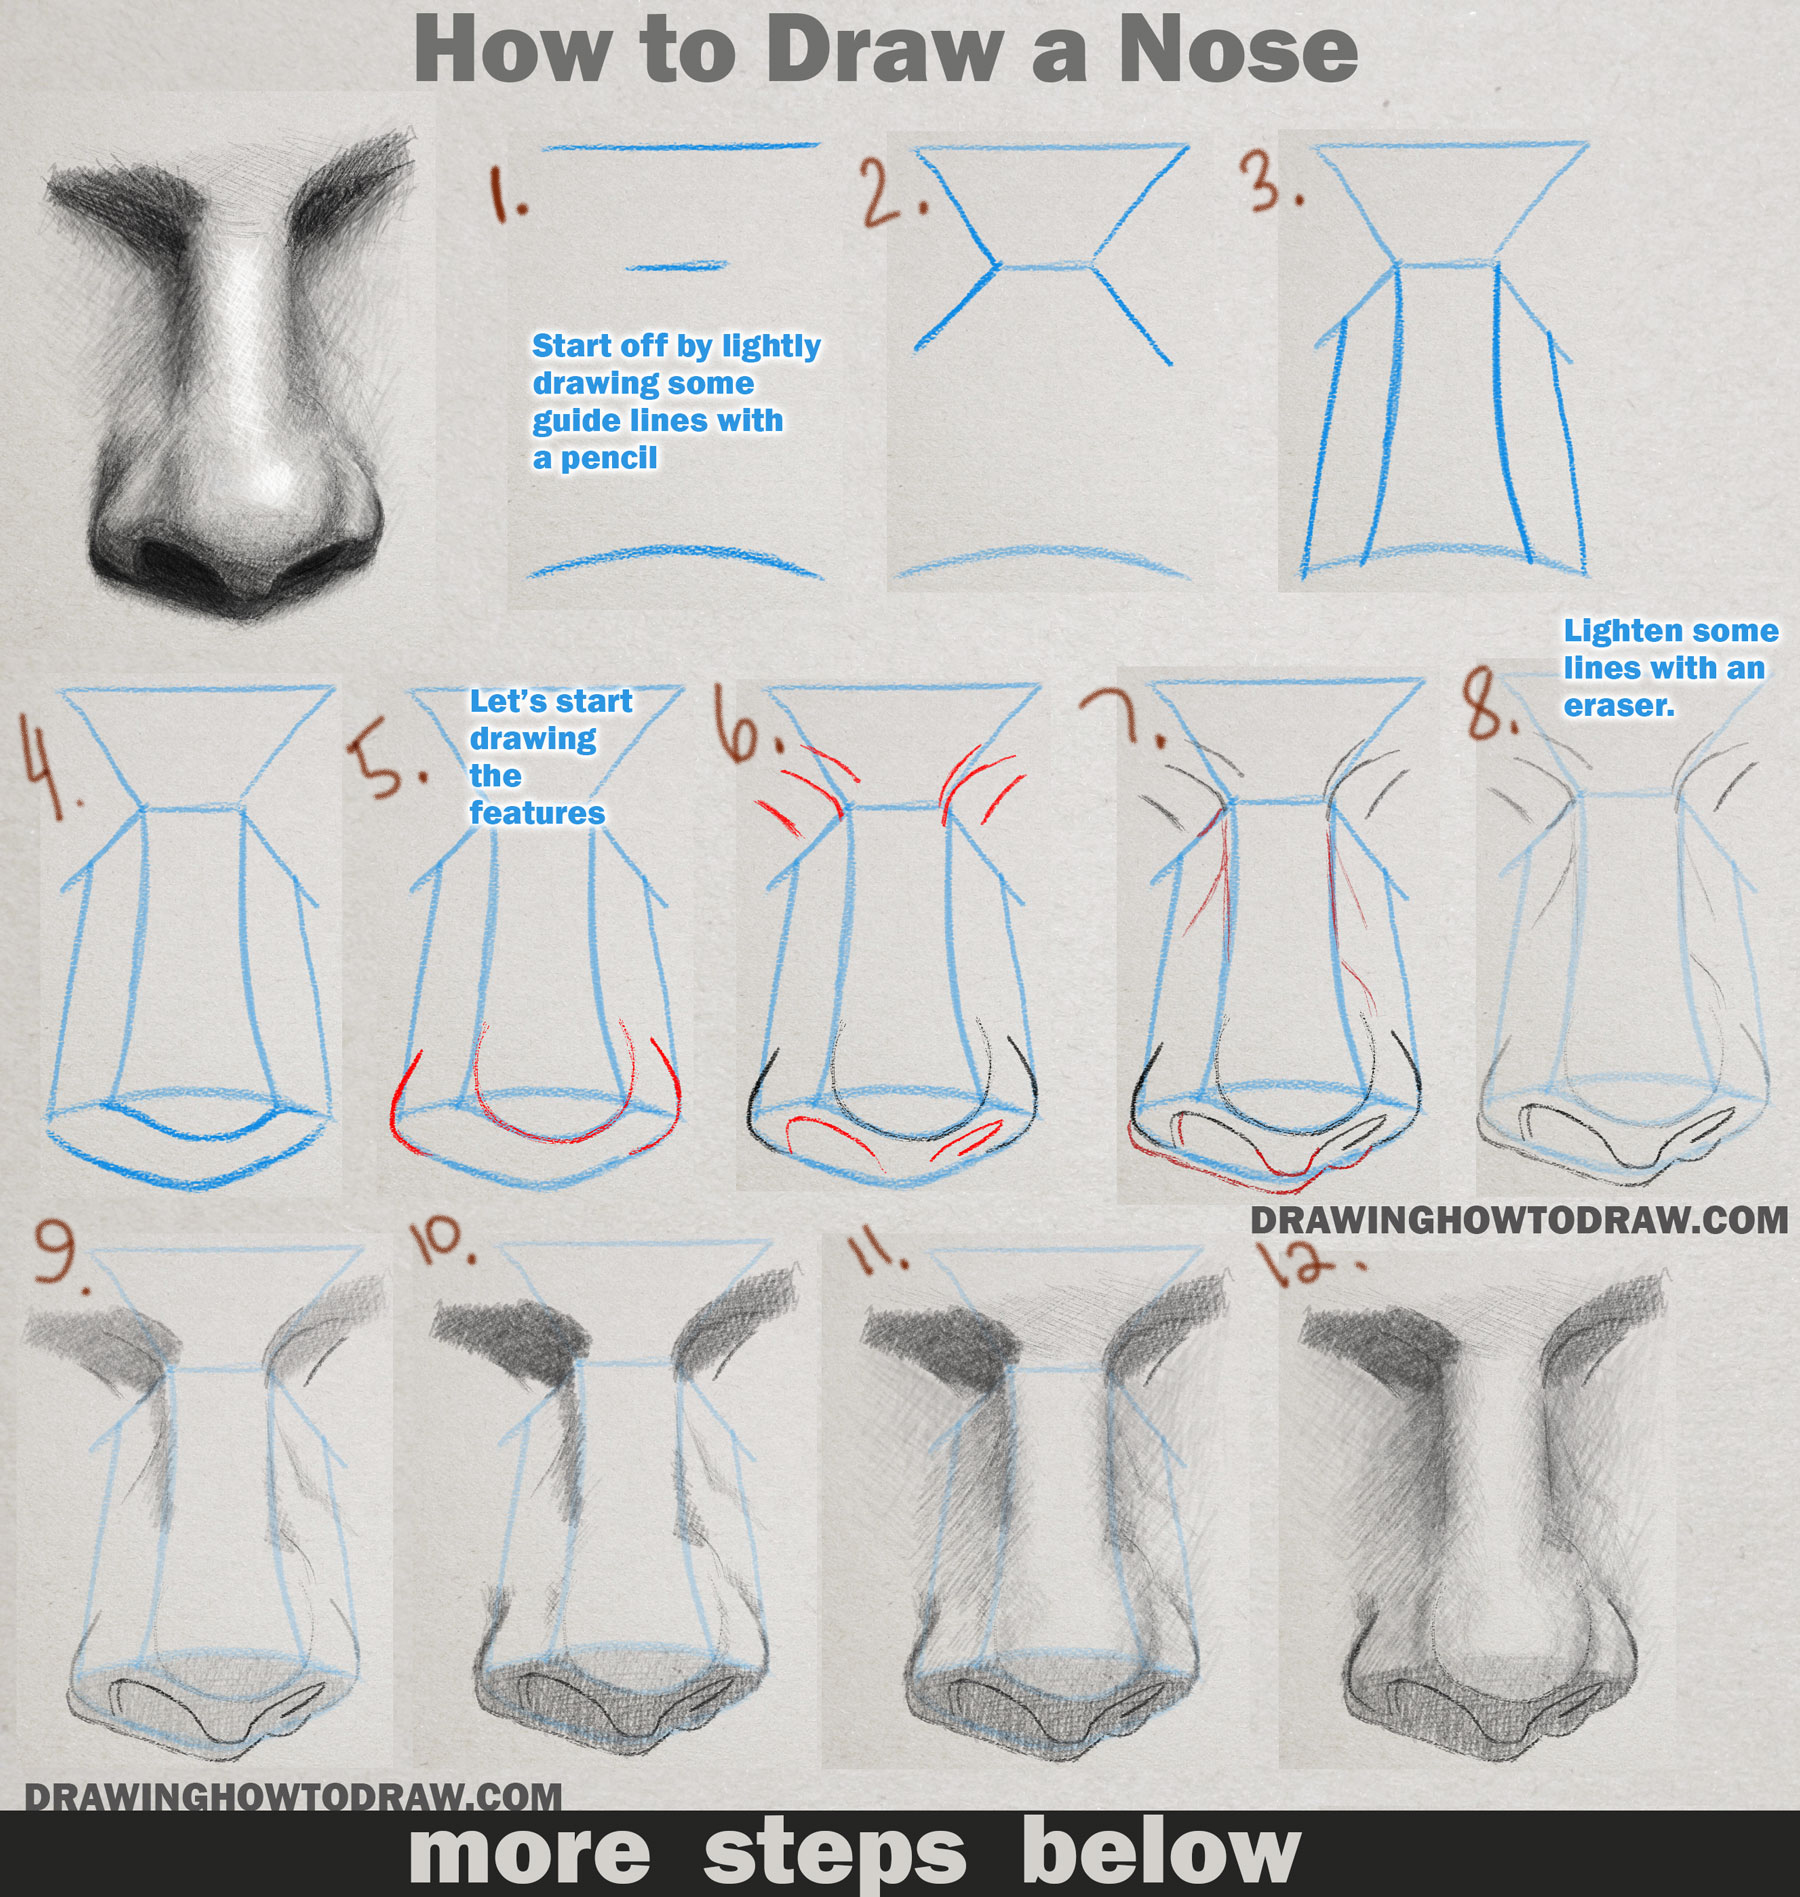 How to draw a адщуке and Shade